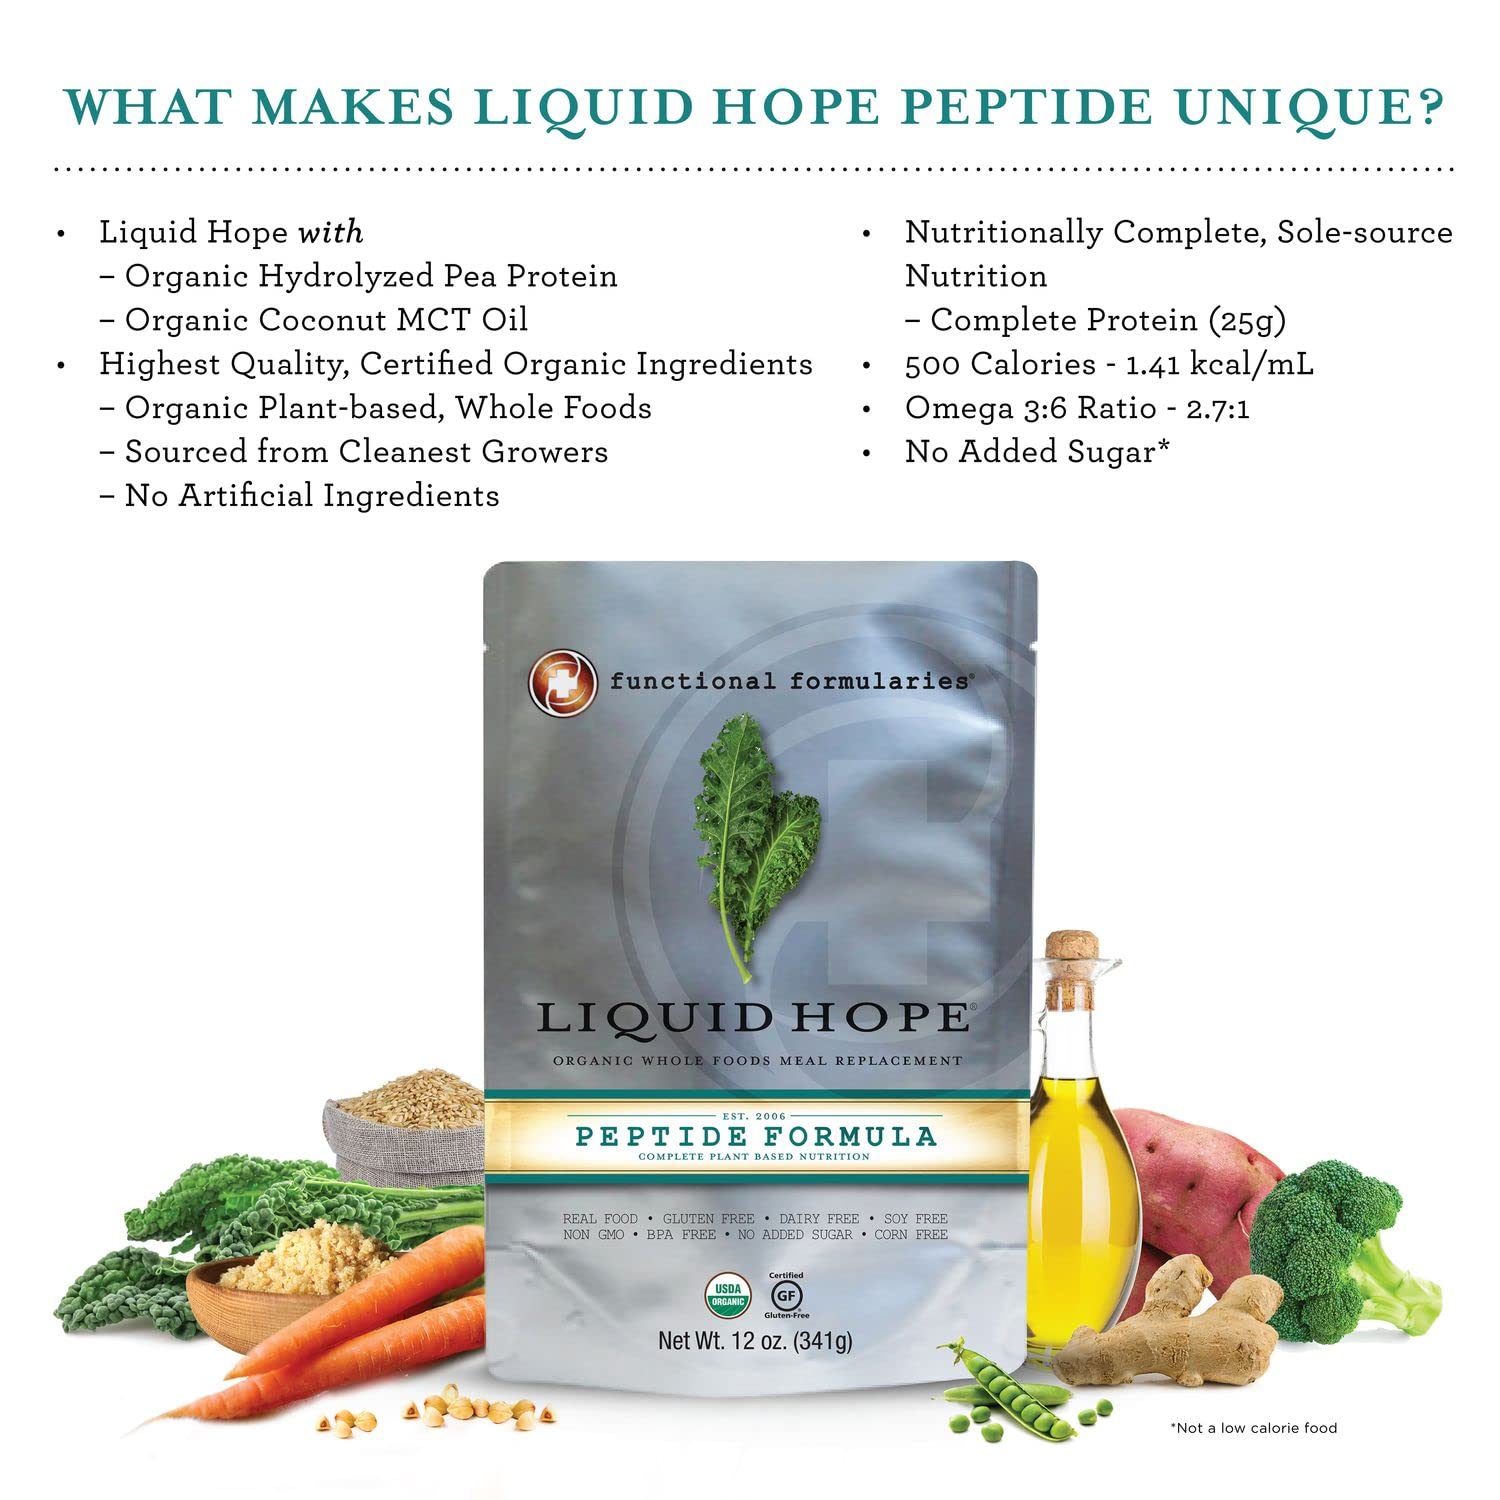 Functional Formularies Liquid Hope Peptide Organic Tube Feeding Formula and Nutritional Meal Replacement Supplement, 12 Oz Pouch, Pack of 24